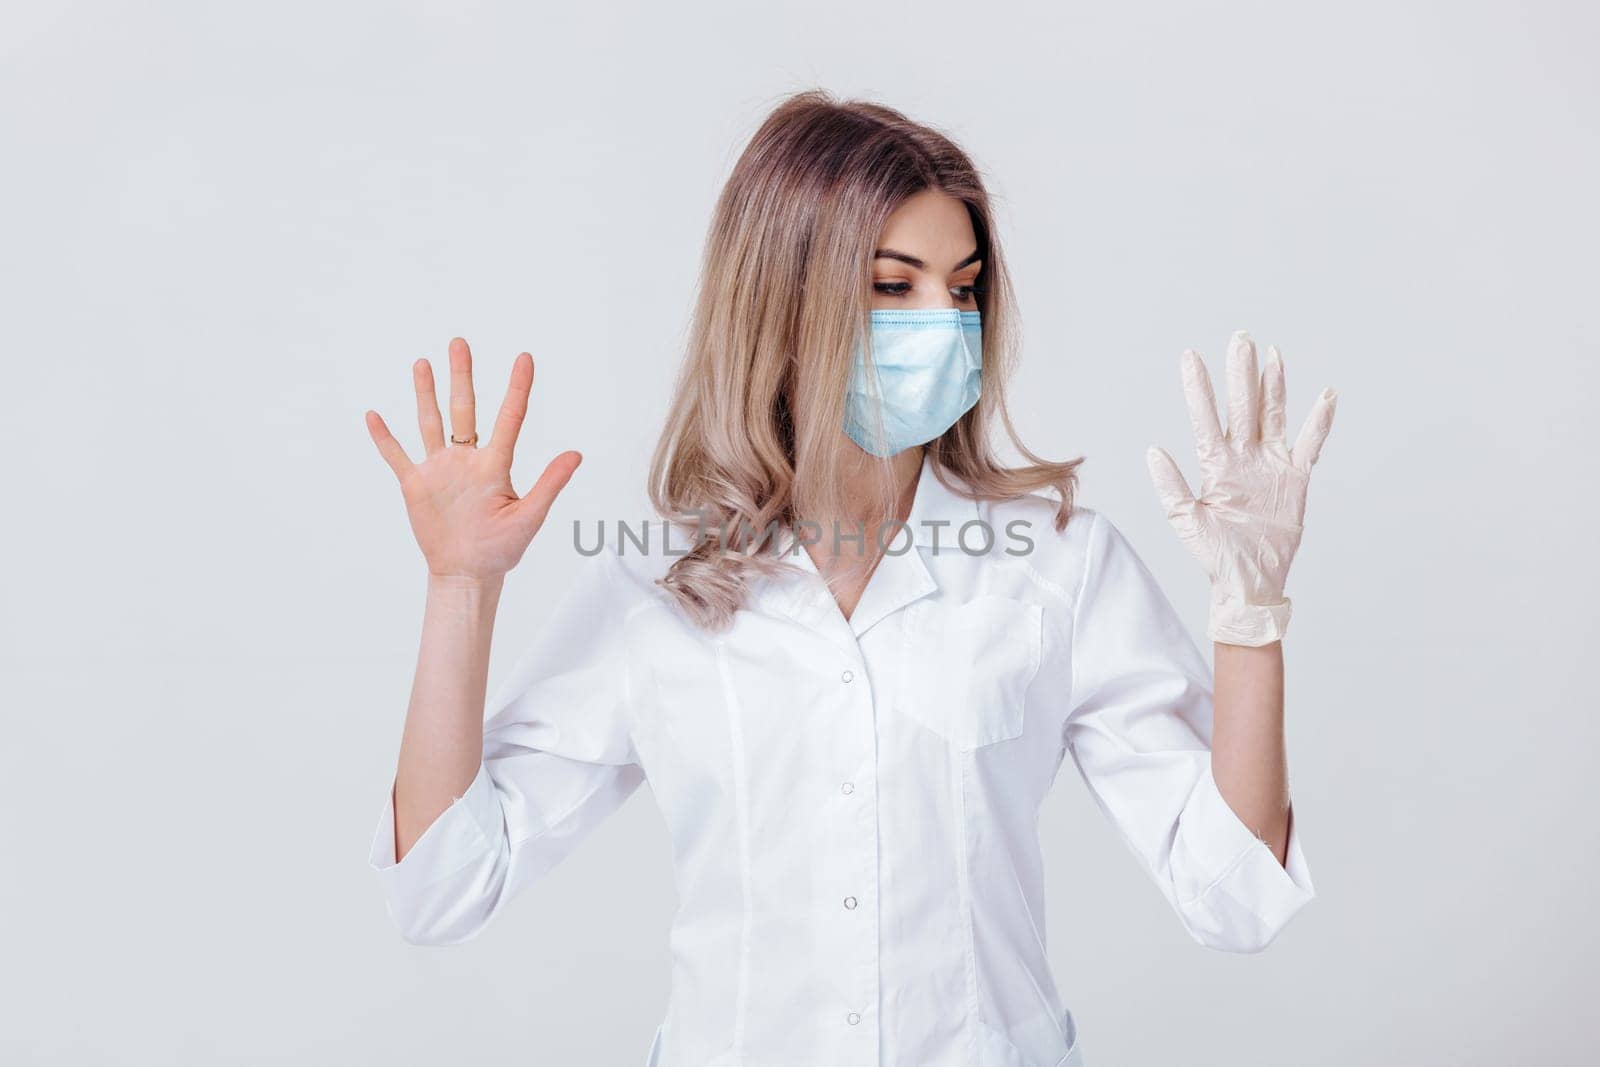 Portrait of woman doctor with face mask doctor shows hands. one gloved hand and the other without